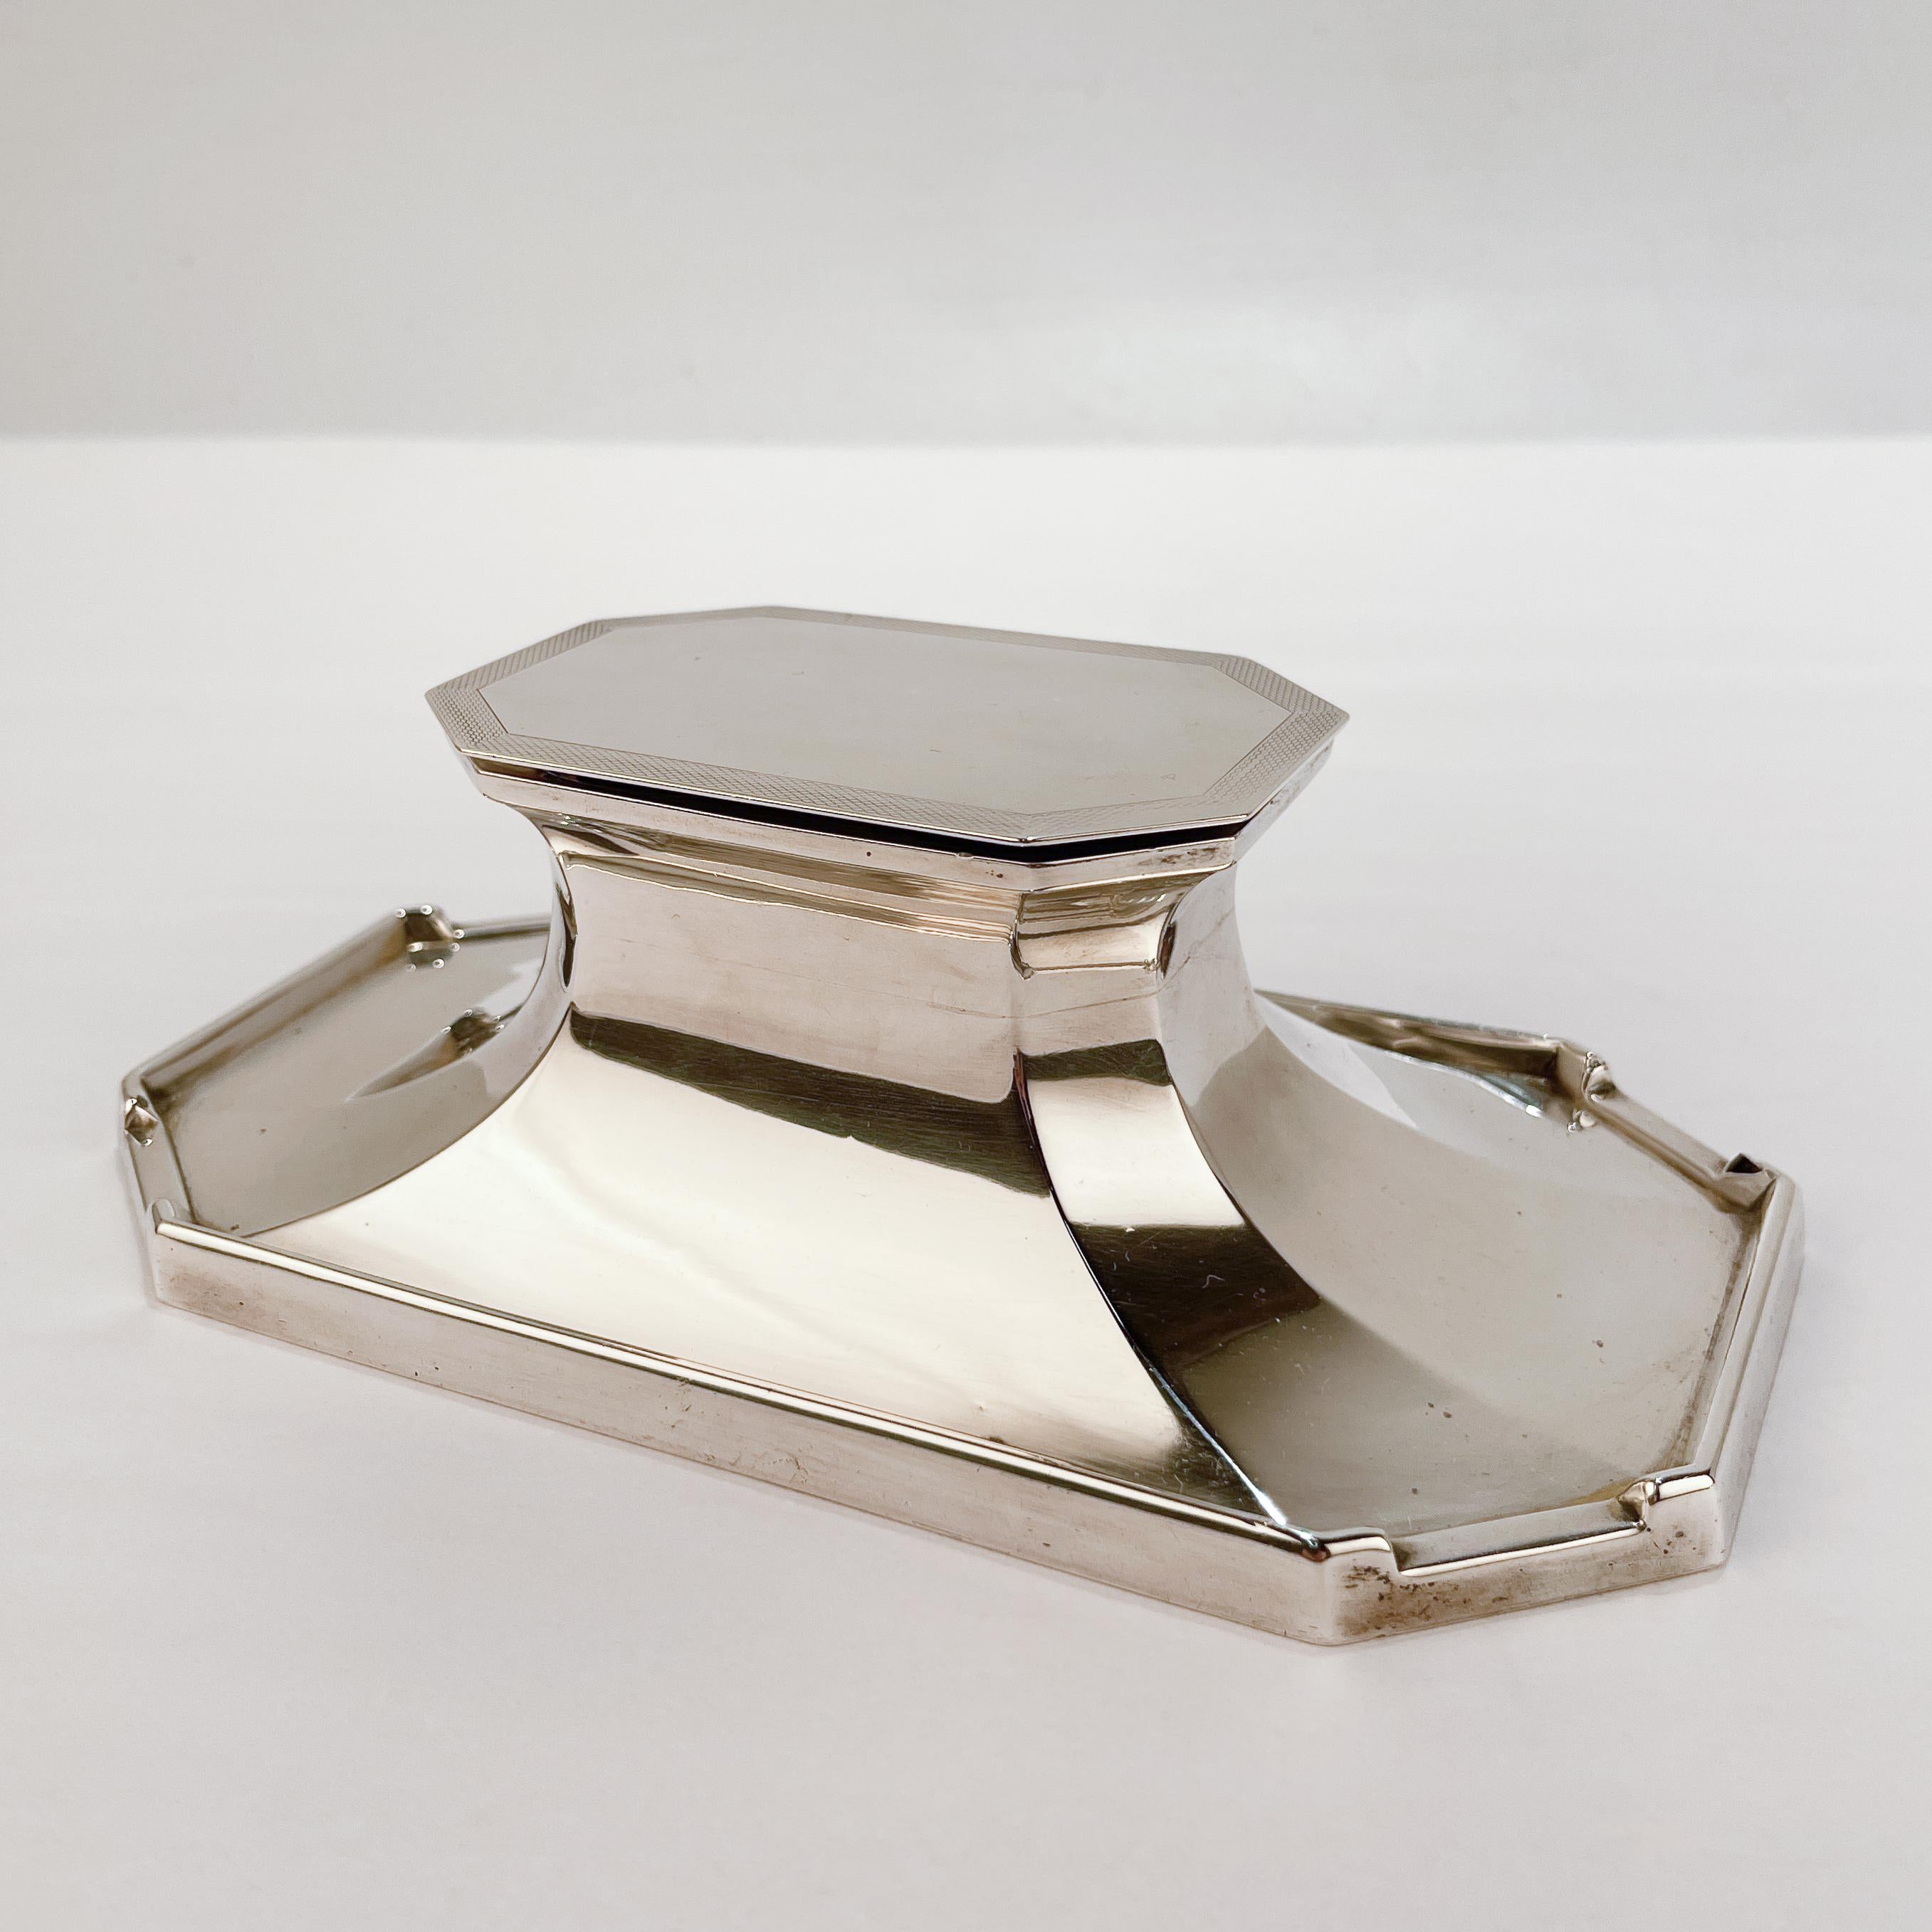 A fine English sterling silver inkwell.

In the Edwardian style. 

With notched corners to the base for pens, a sloped pedestal center that supports two gilt inkwell chambers and a hinged lid with engine-turned decoration.

The inkwell is cement